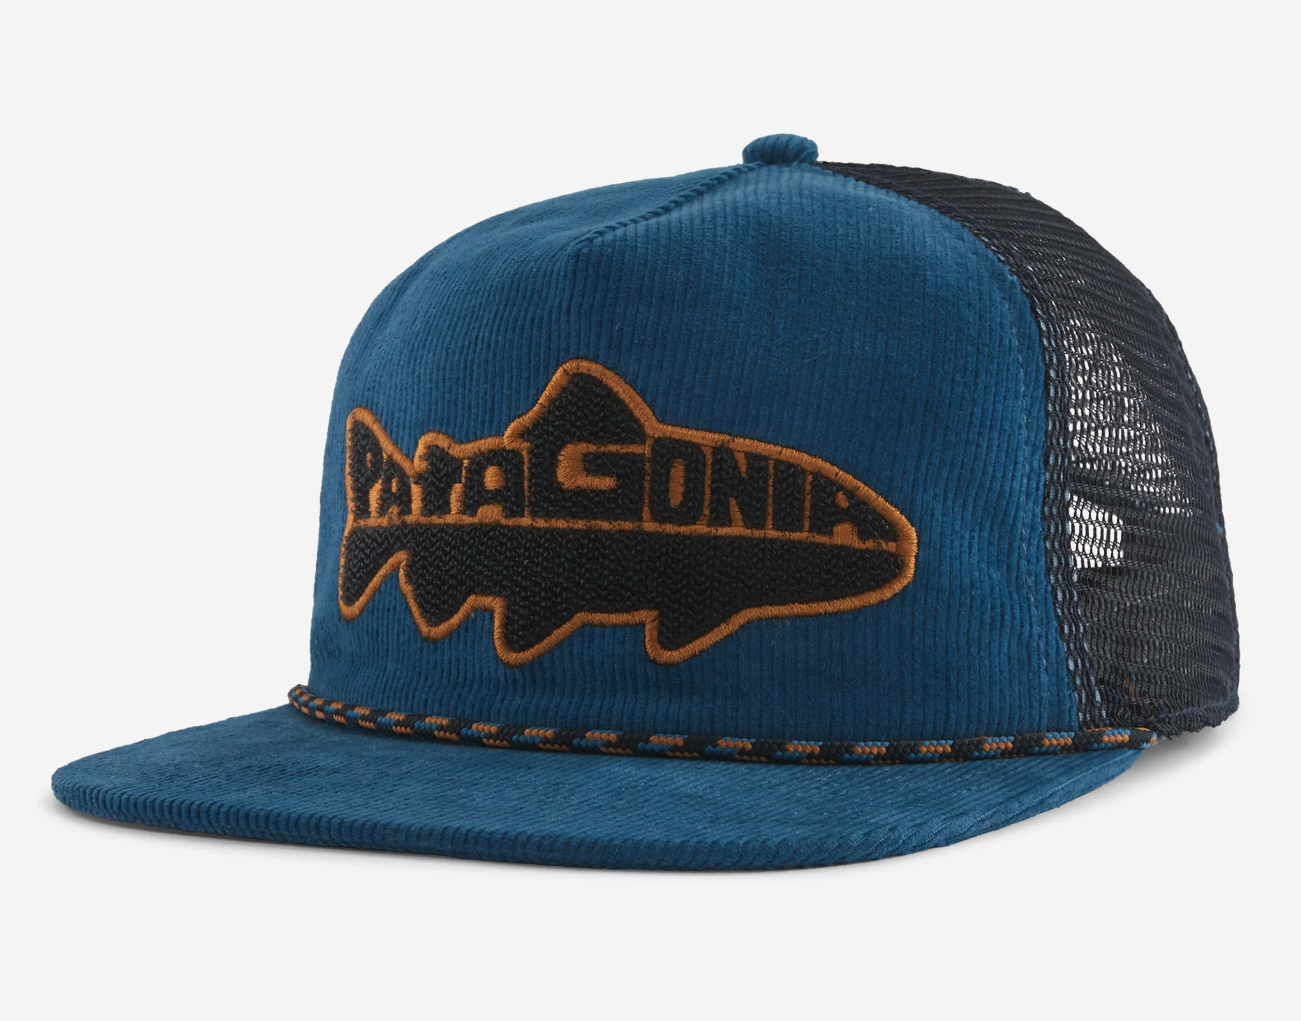 Patagonia Fly Catcher Hat, Buy Patagonia Fly Fishing Hats Online at